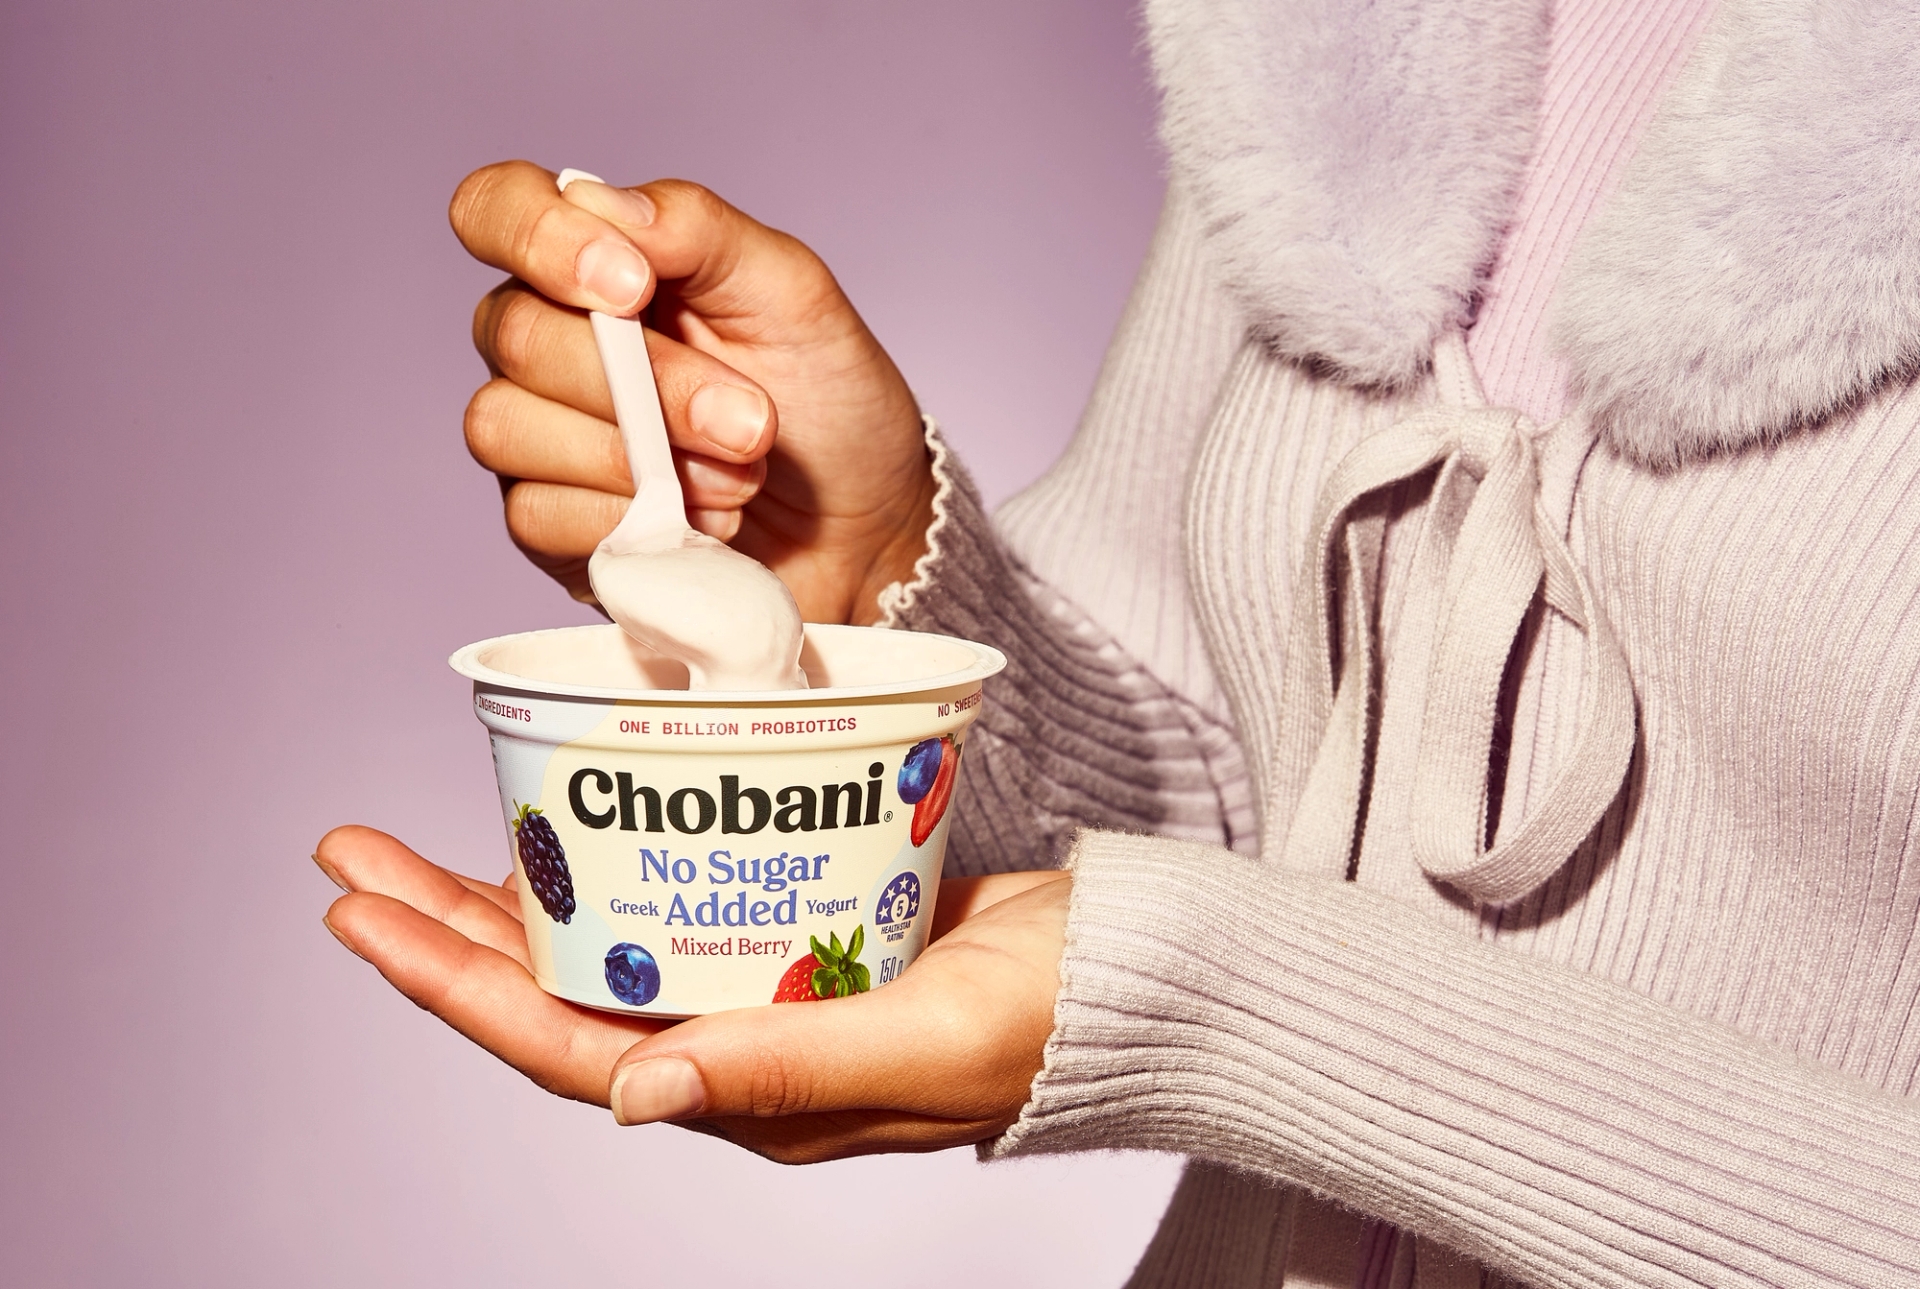 Nineties style photography of a person eating Chobani No Sugar Added yogurt featuring packaging design agency by Our Revolution